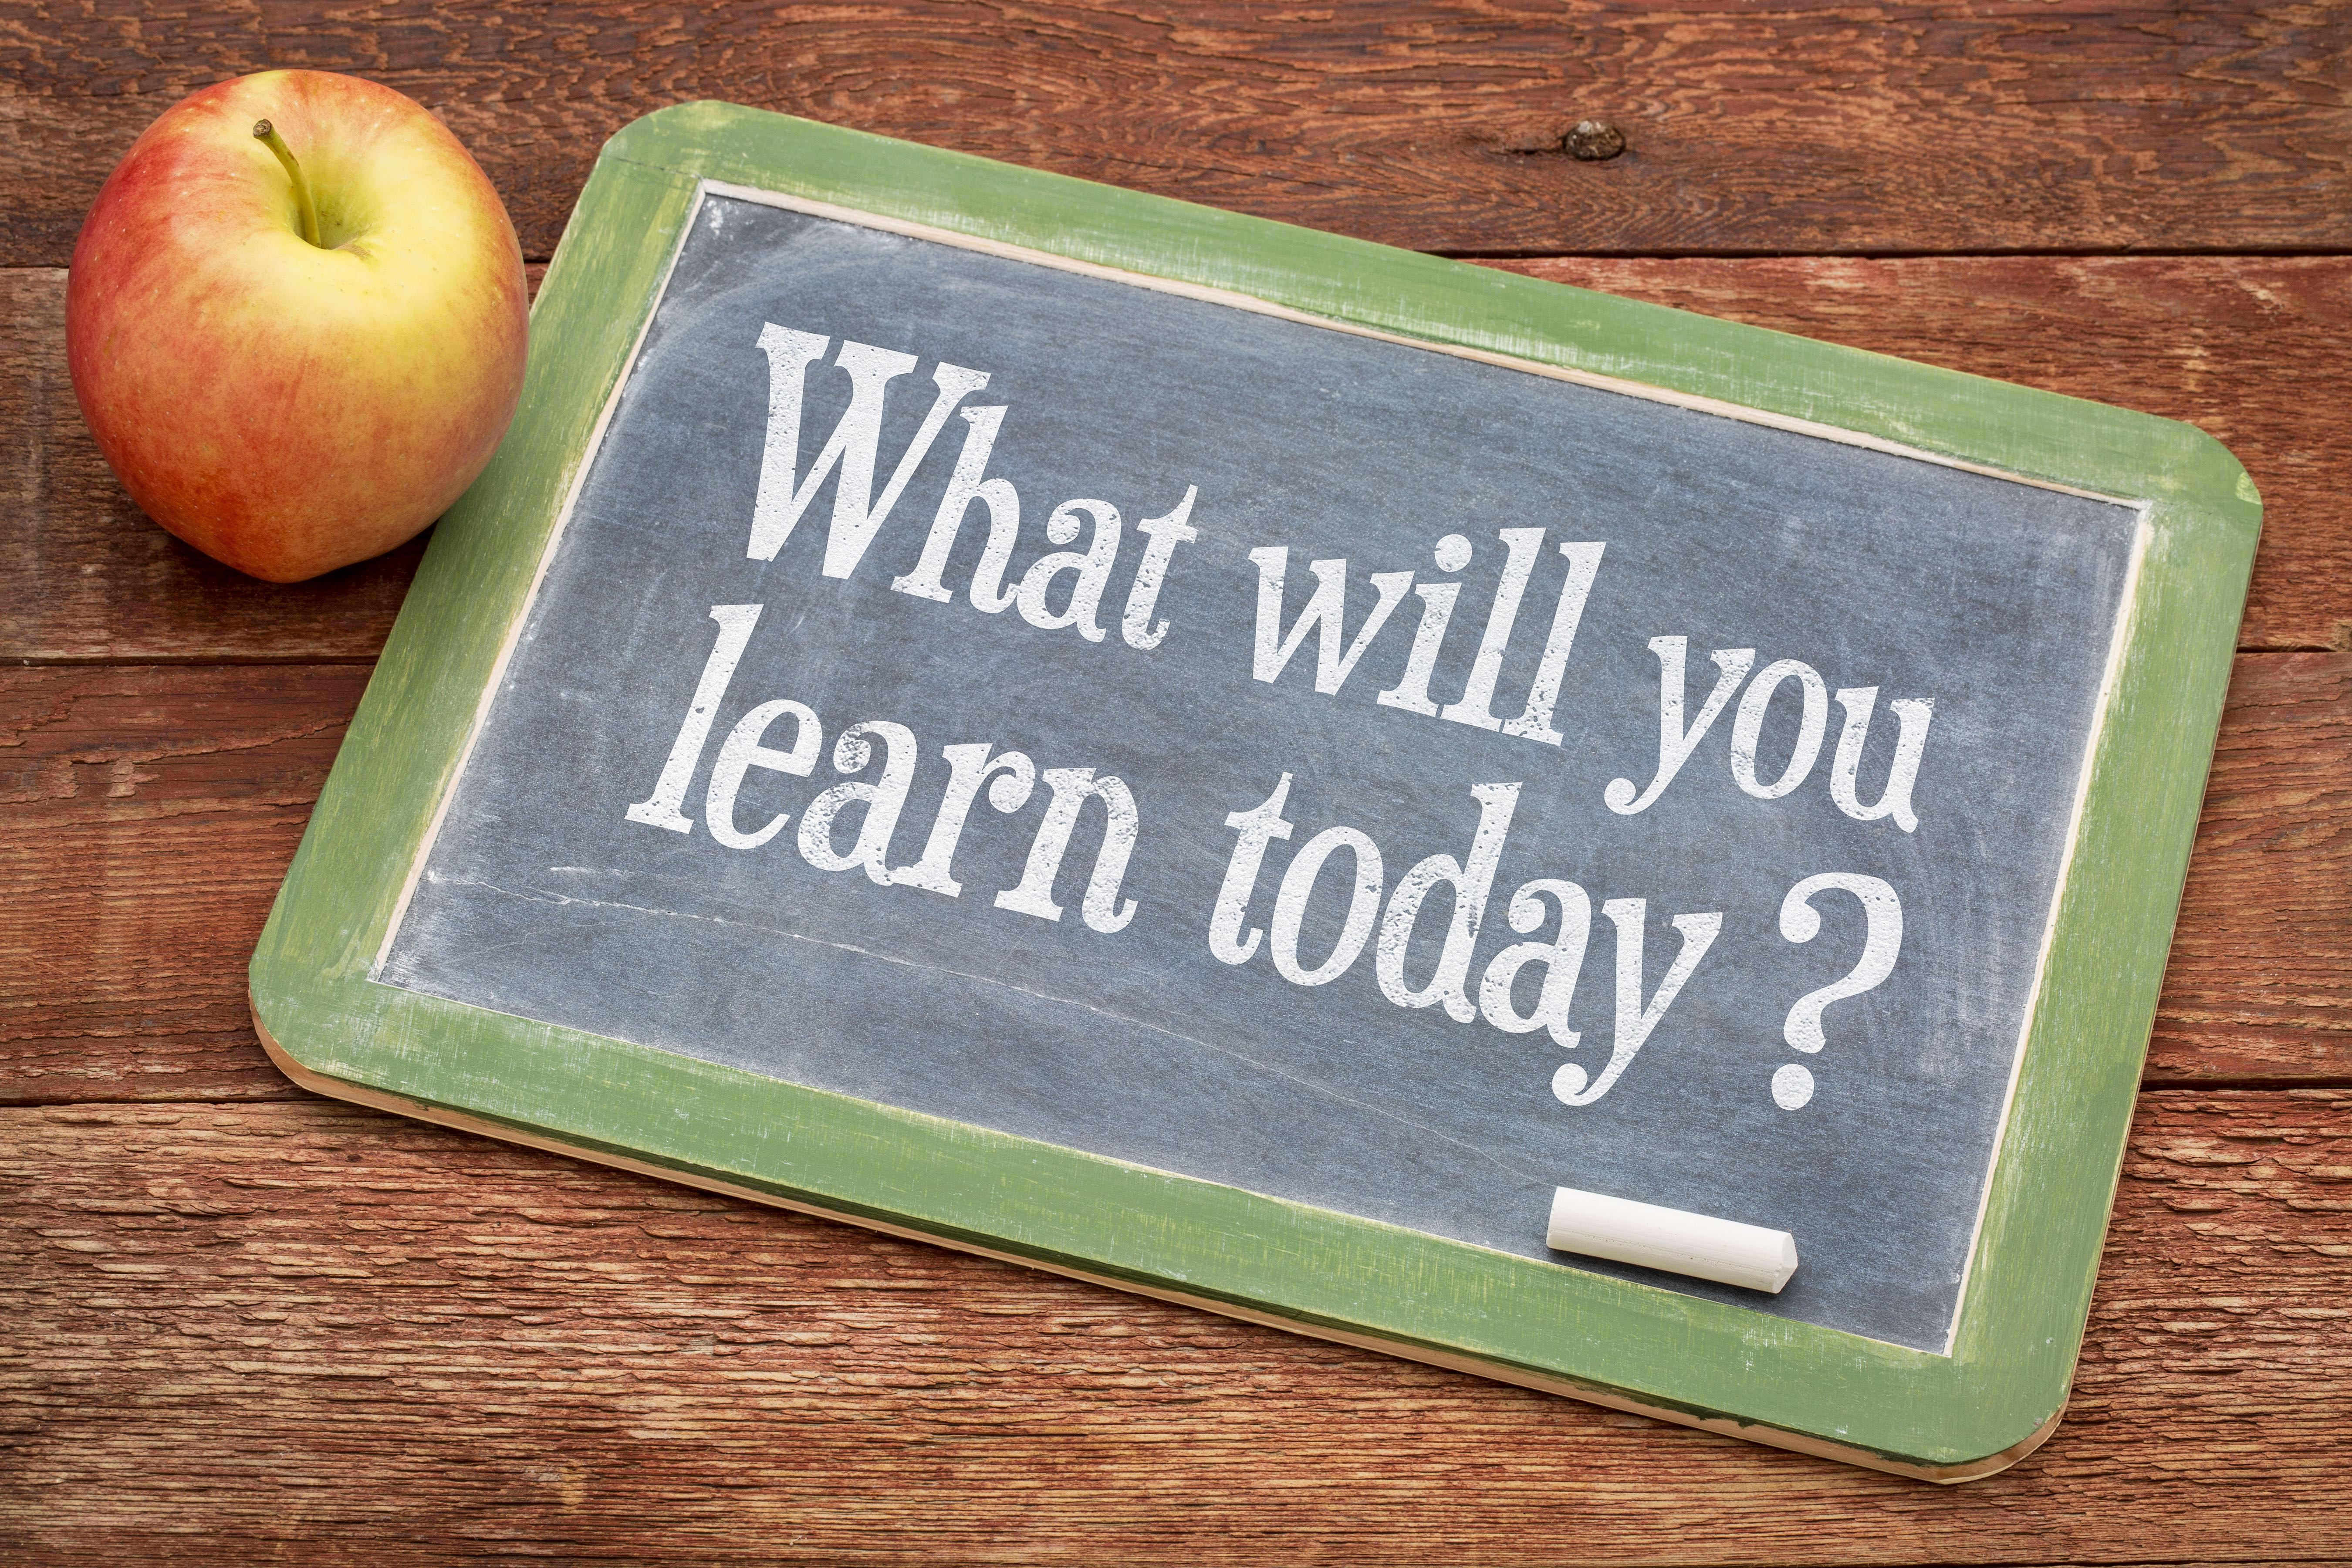 What will you learn today? A question on a slate blackboard against red barn wood